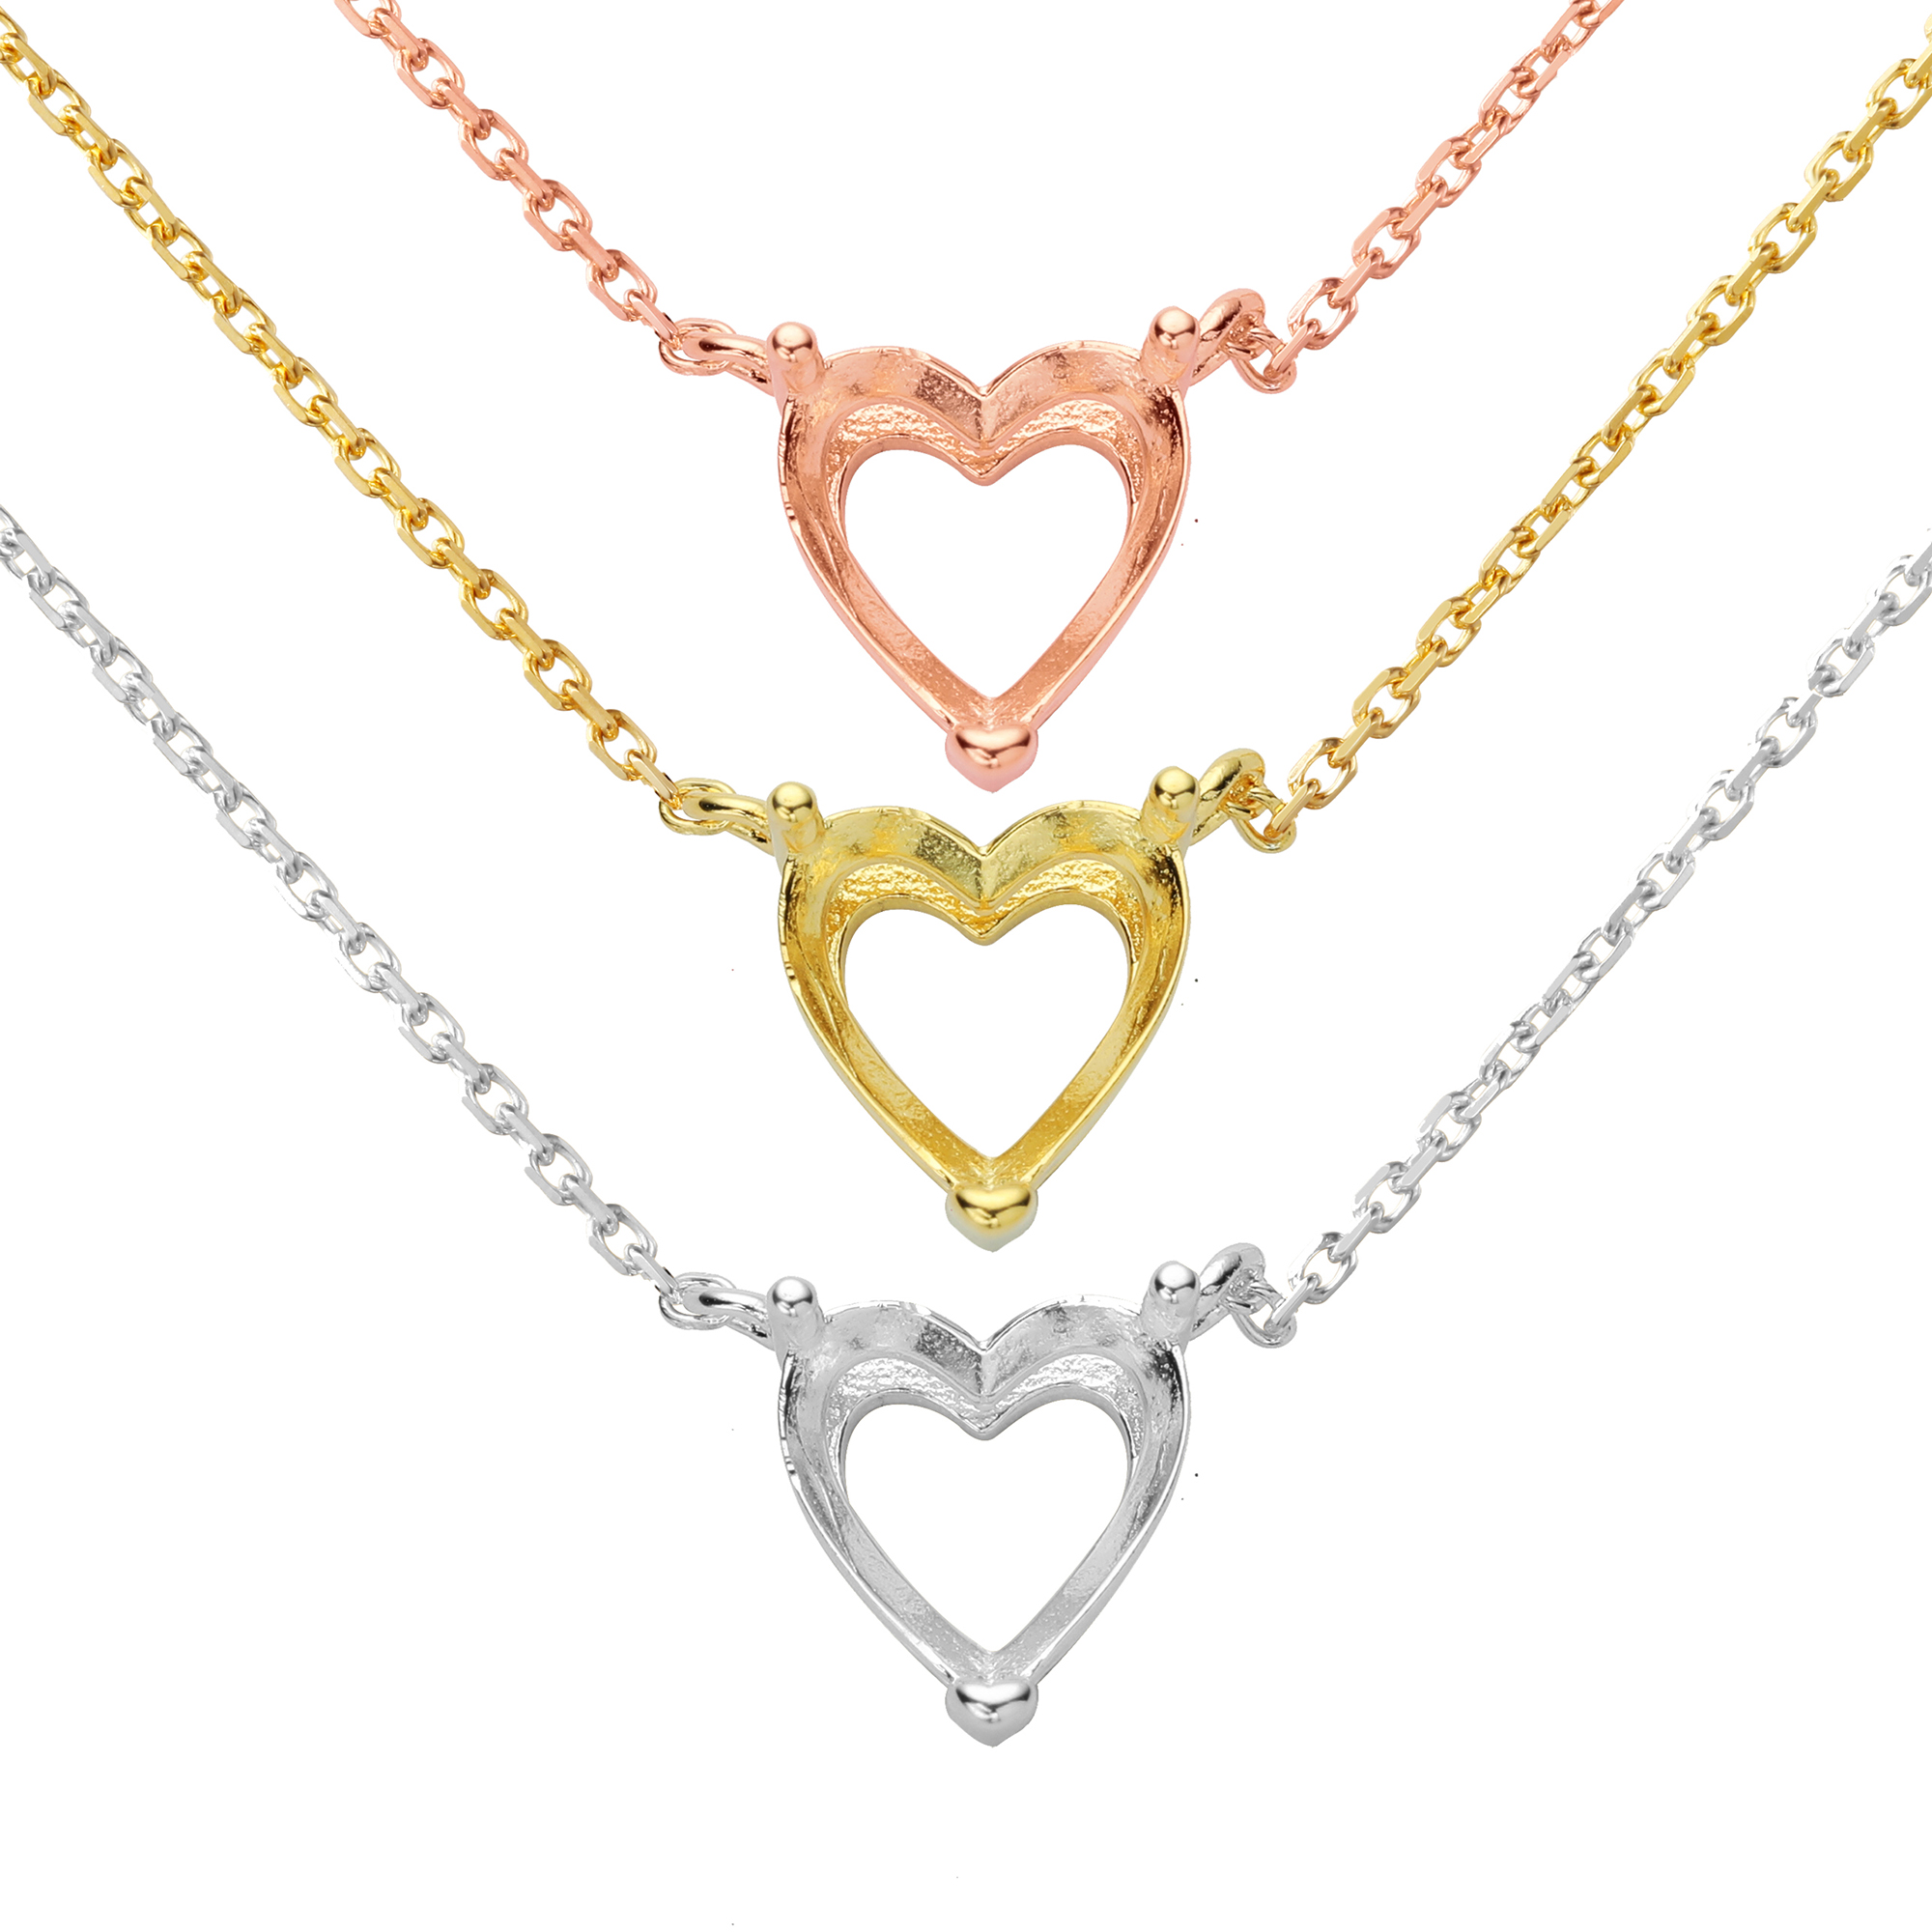 8MM Heart Prong Pendant Settings,Simple Heart Necklace,Solid 925 Sterling Silver Necklace,DIY Jewelry With Necklace Chain 16''+2'' 1431210 - Click Image to Close